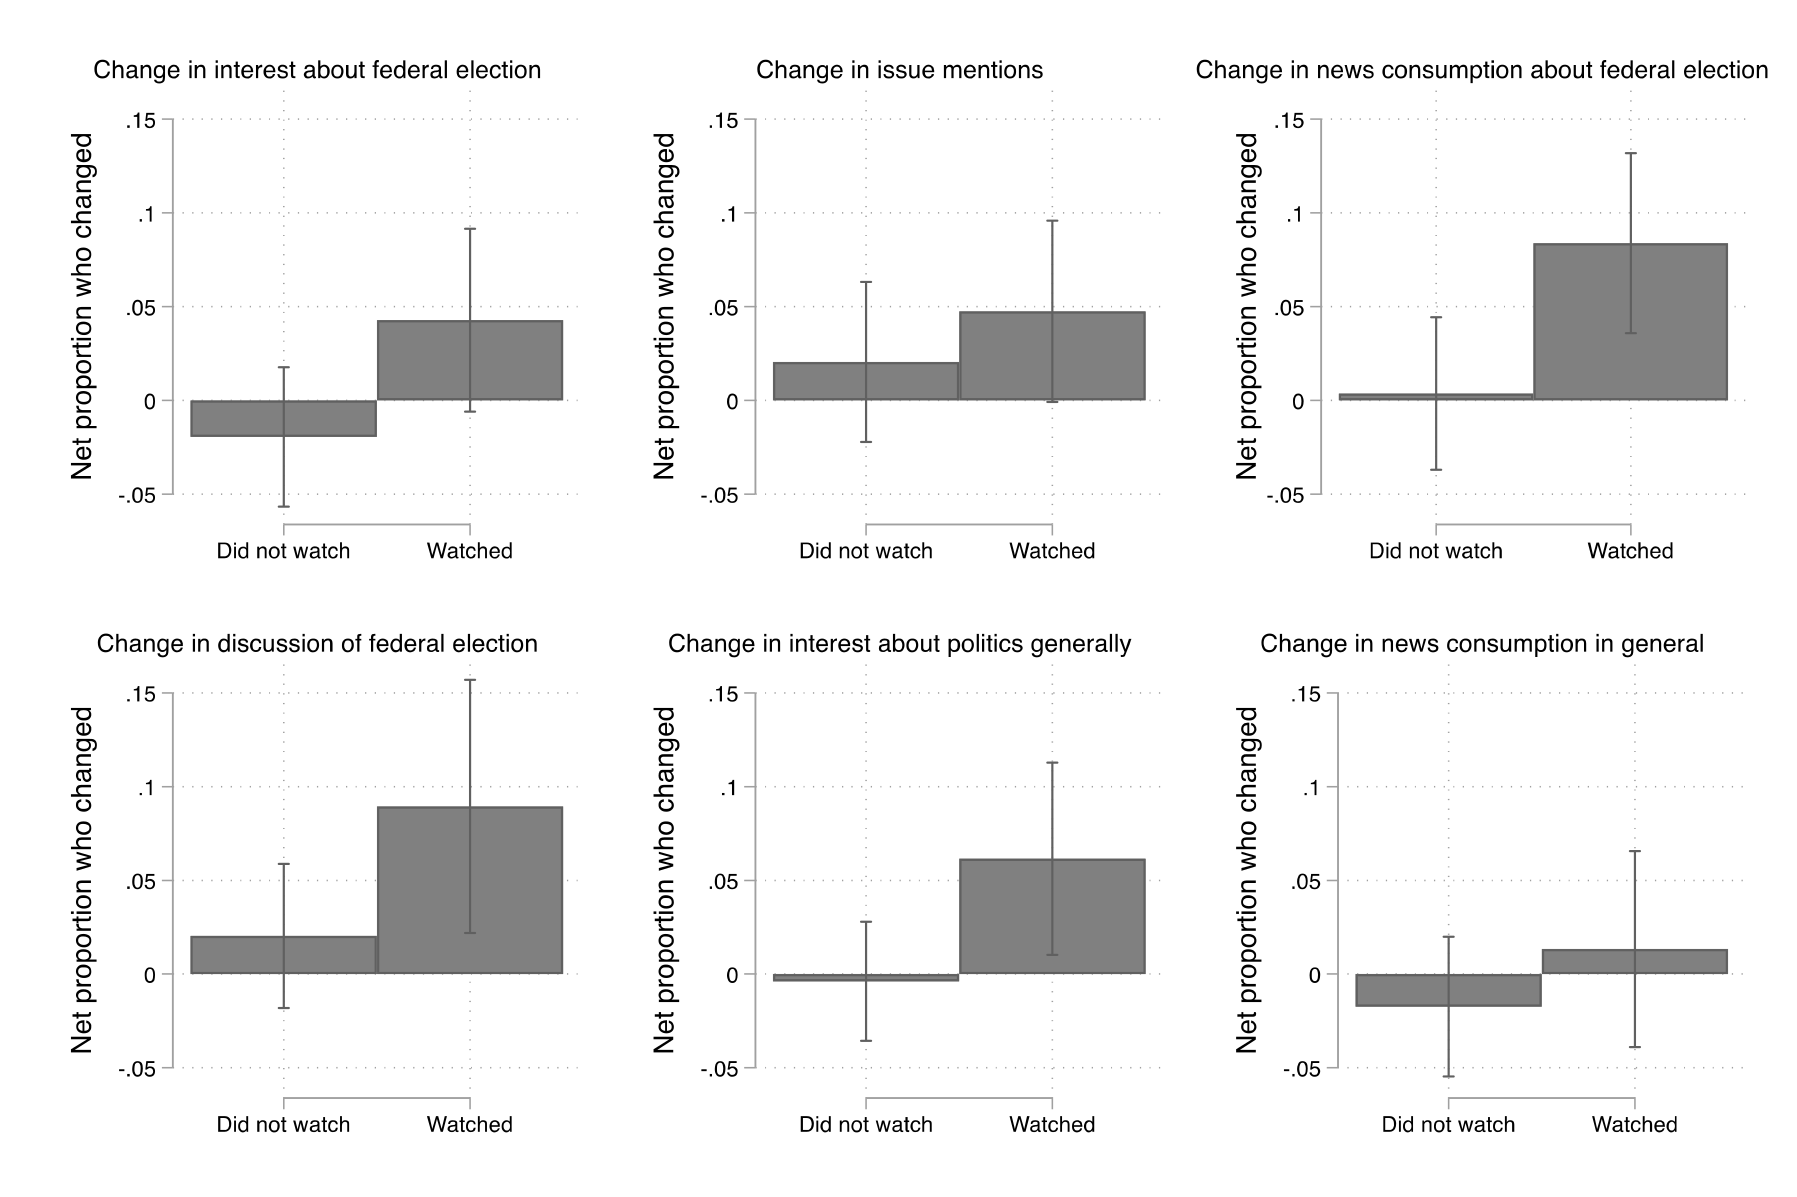 Figure 23. This figure shows the impact of debate watching on political engagement outcomes.  Debate watching was associated with increased interest in the federal election, with increased news consumption about the federal election, and with increased interest about politics generally.